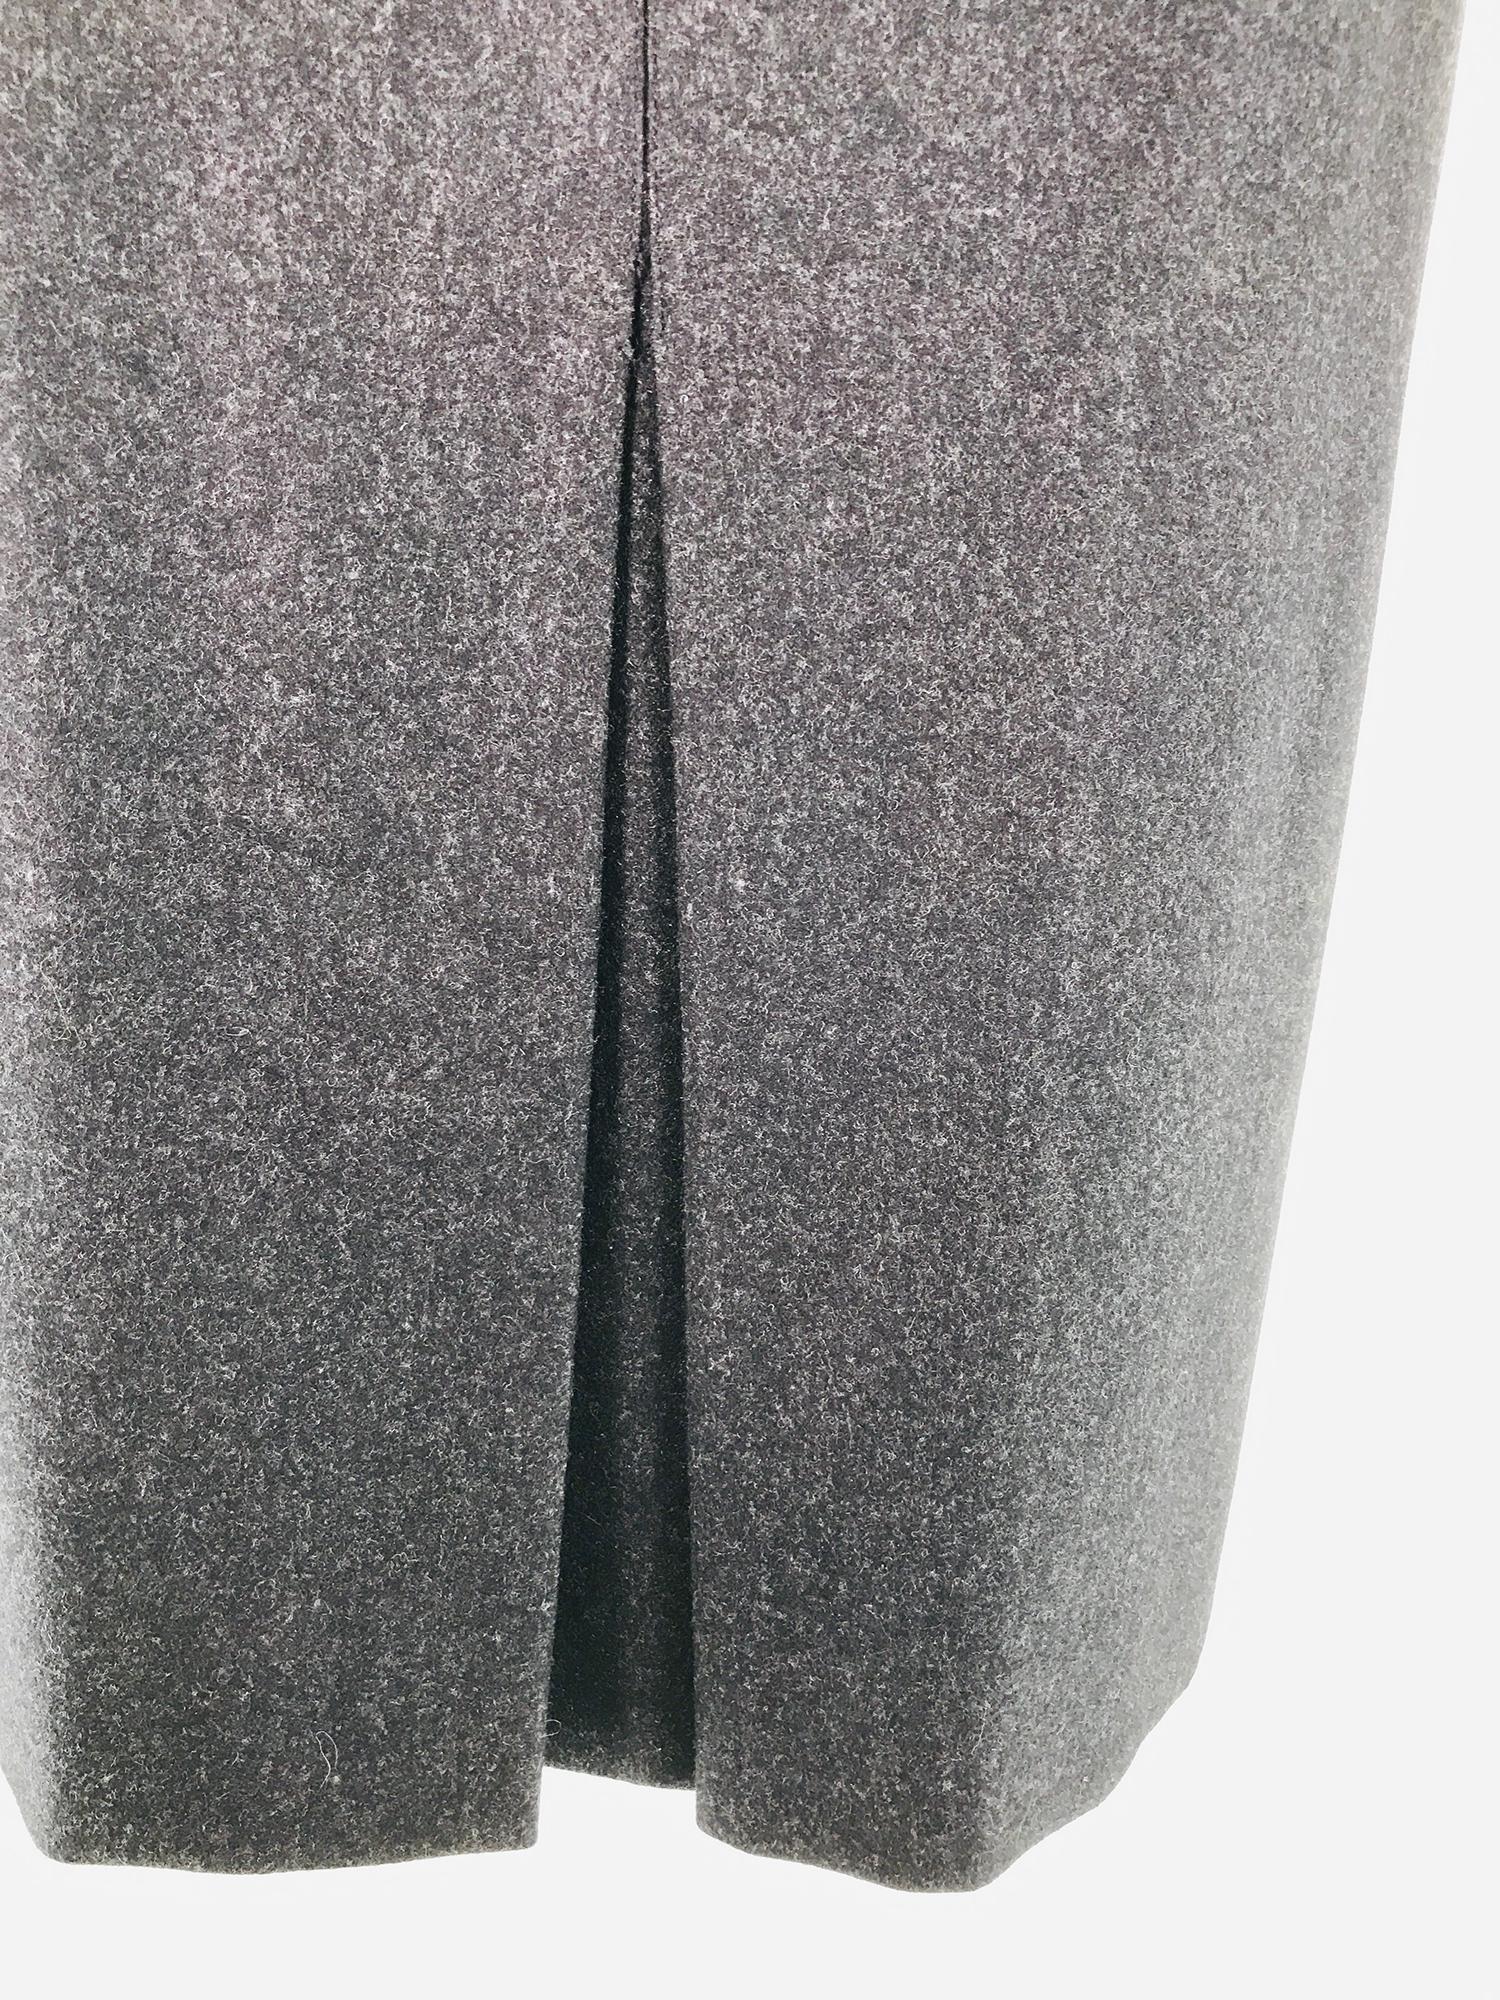 Chanel Charcoal Wool Kick Pleat Front Pocket Pencil Skirt Vintage For Sale 4